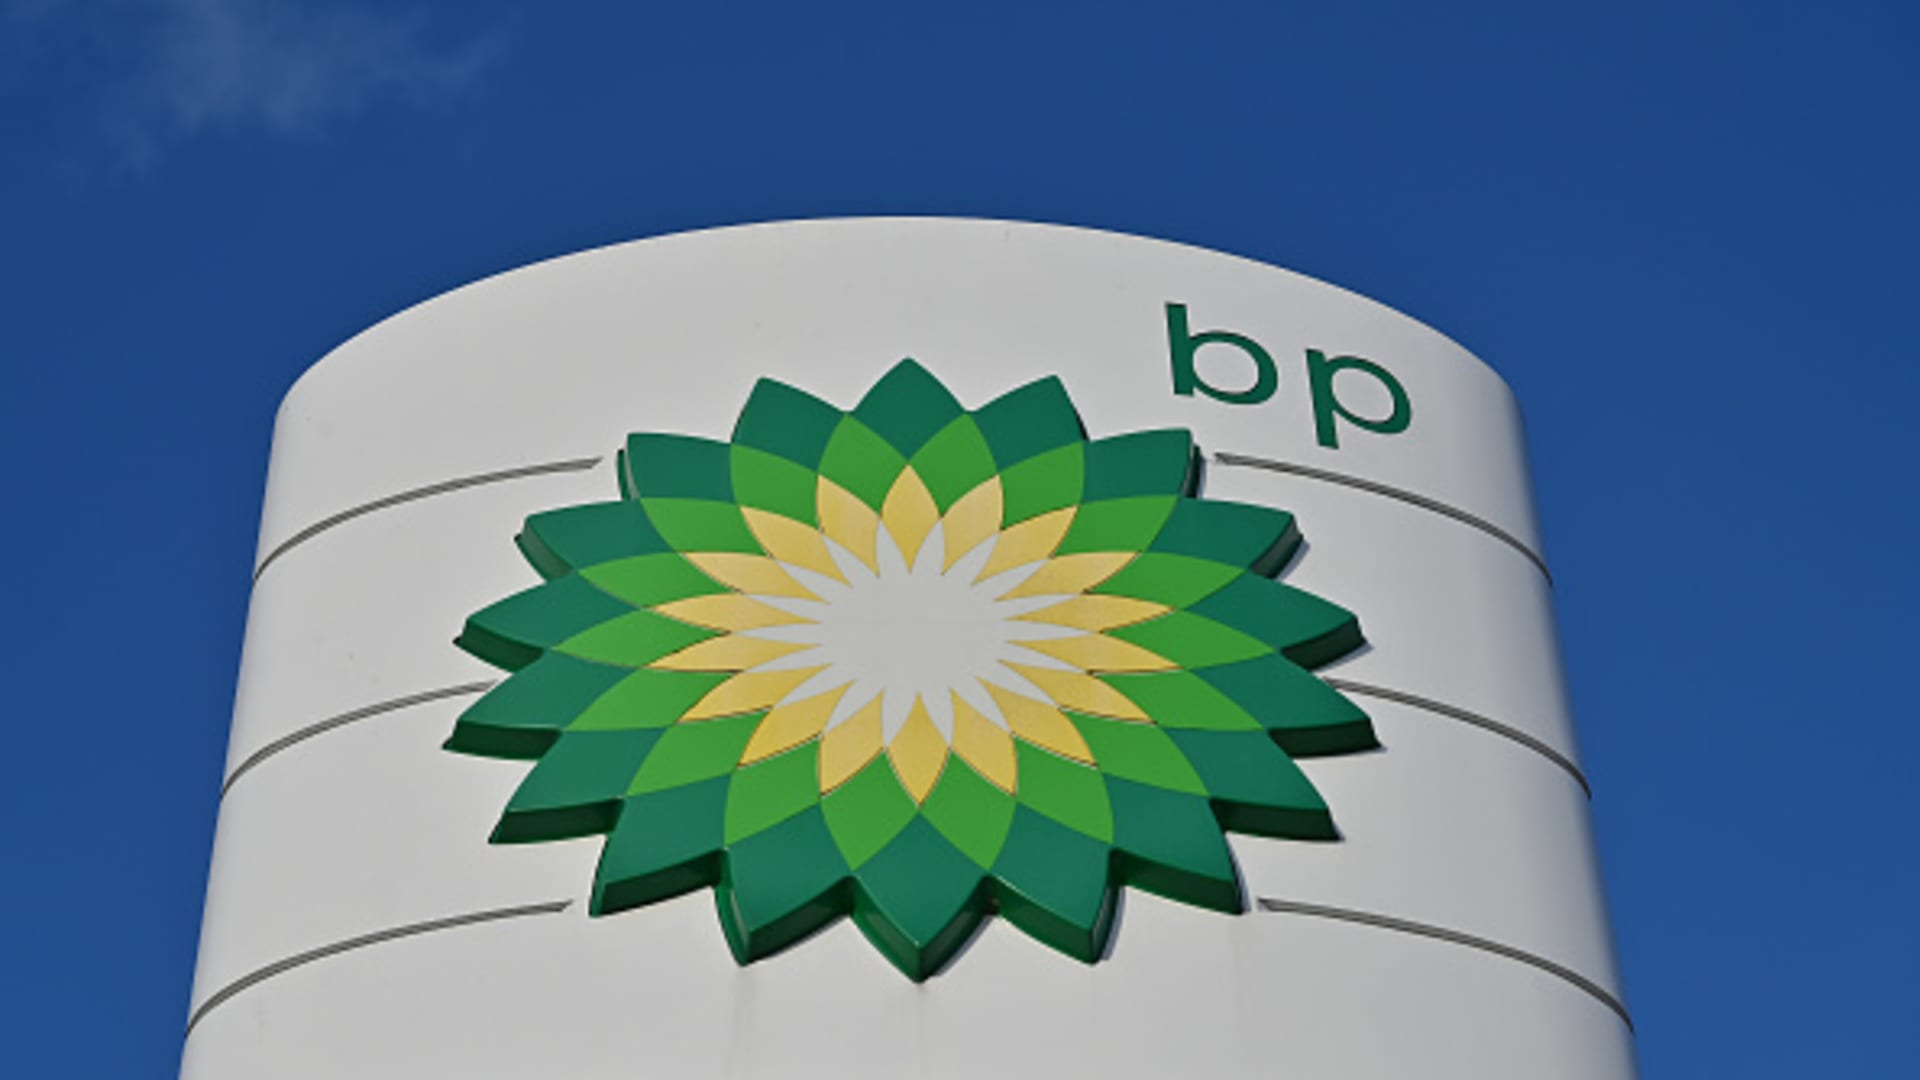 BP exec's husband guilty of insider trading .8 million, snooped on her calls